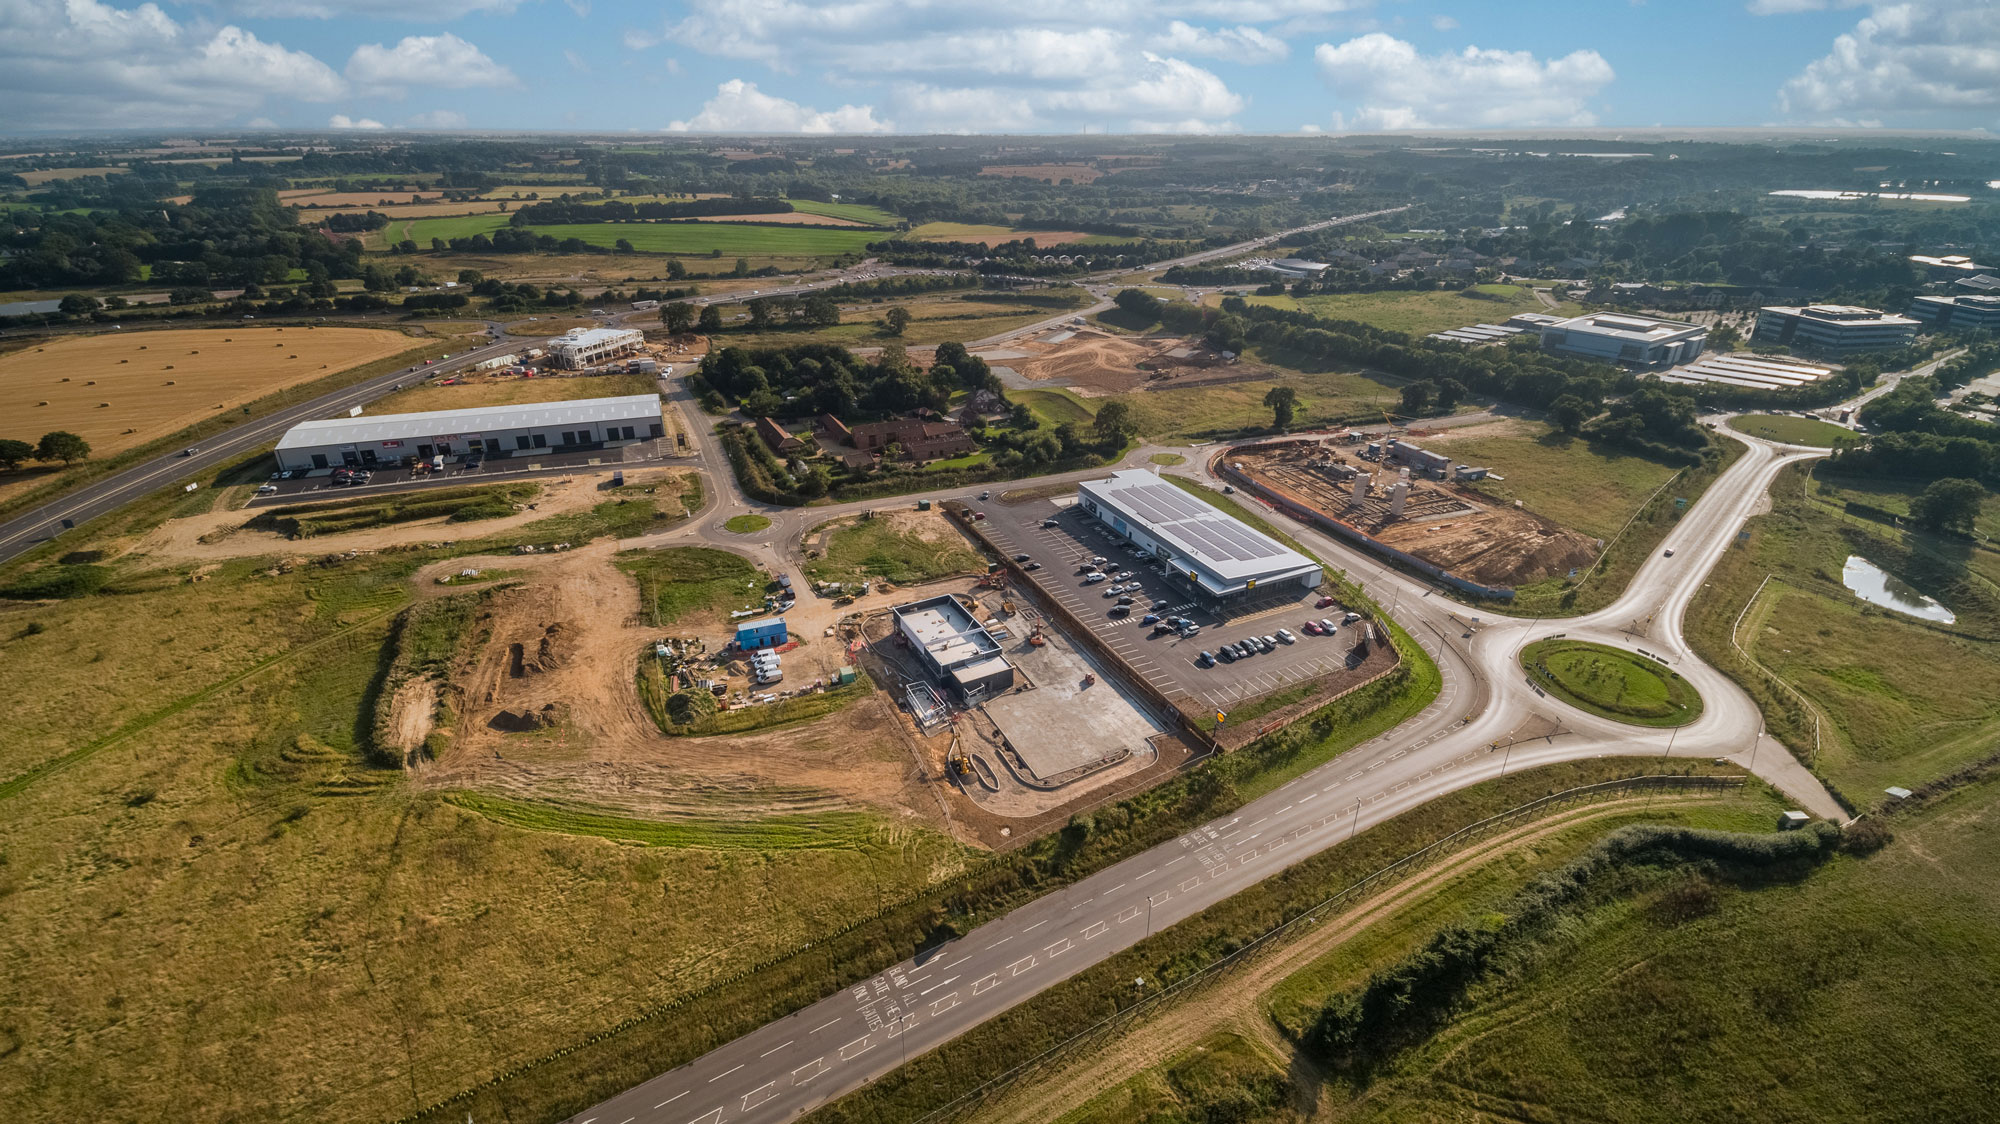 A highly accessible destination on the interchange between the new Broadland Northway and A47 with planning consent for employment, car showroom, retail and leisure use